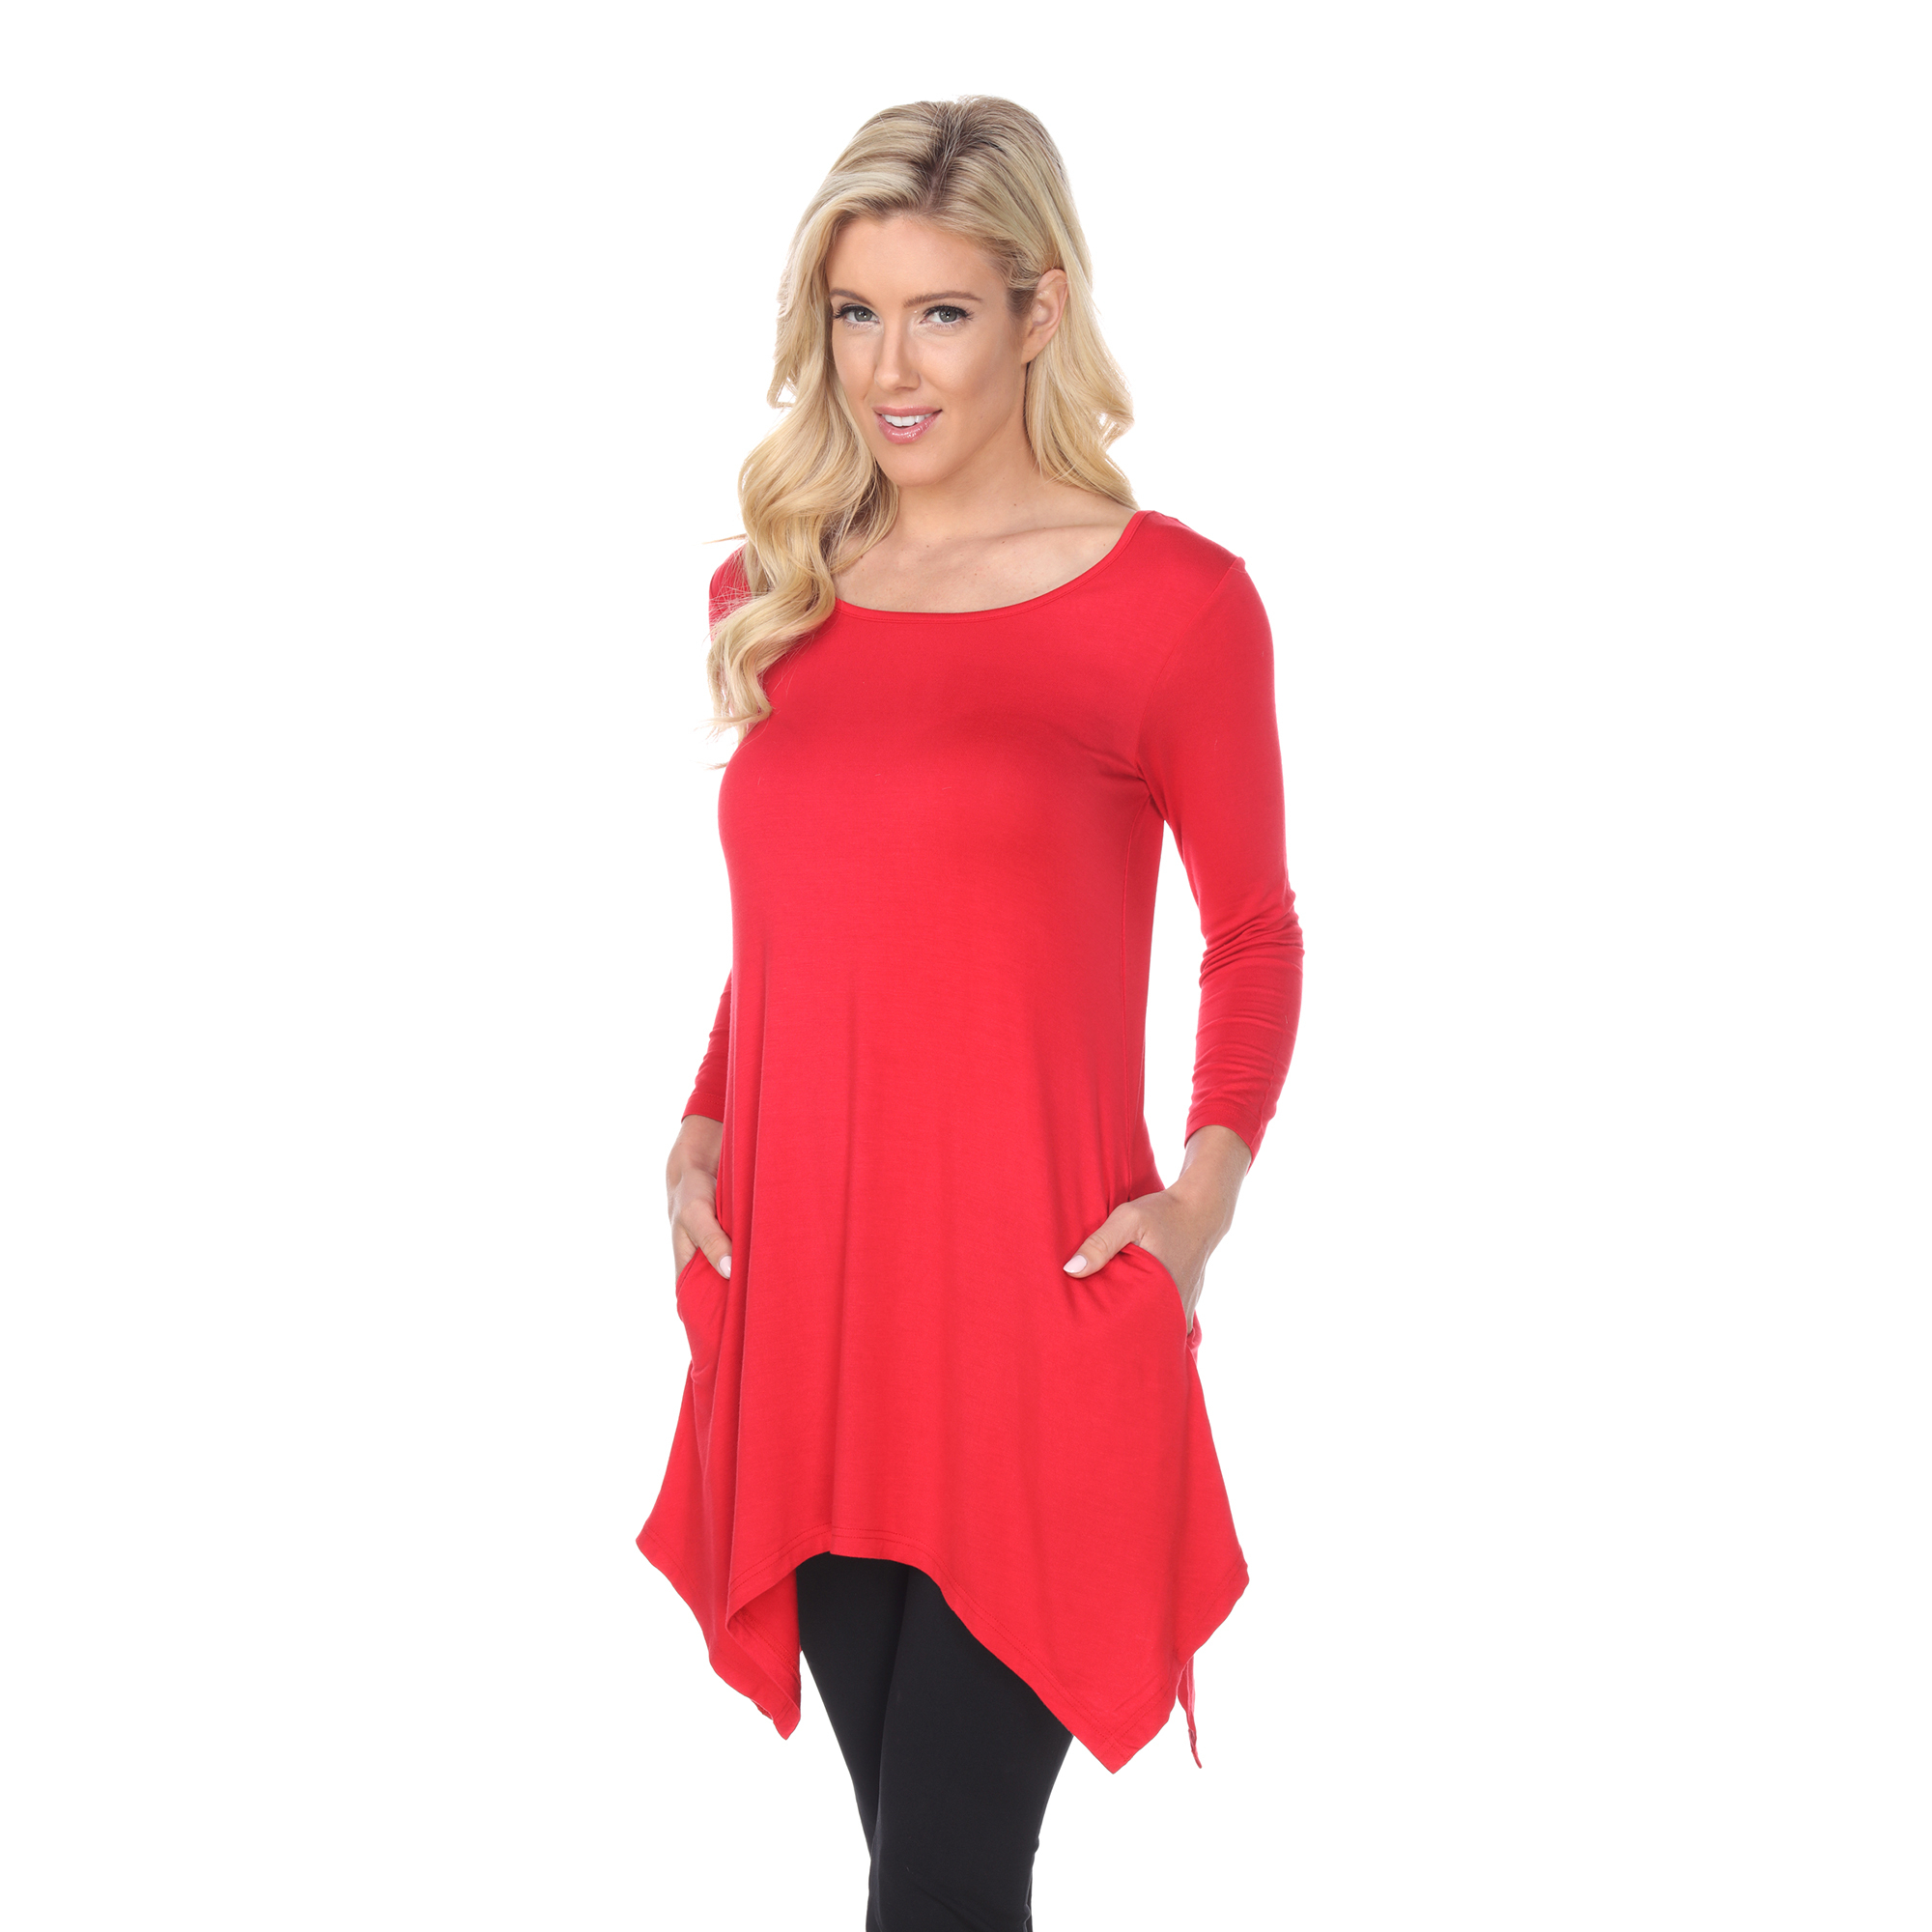 White Mark Women's Quarter Sleeve Tunic Top With Pockets - Red, Medium